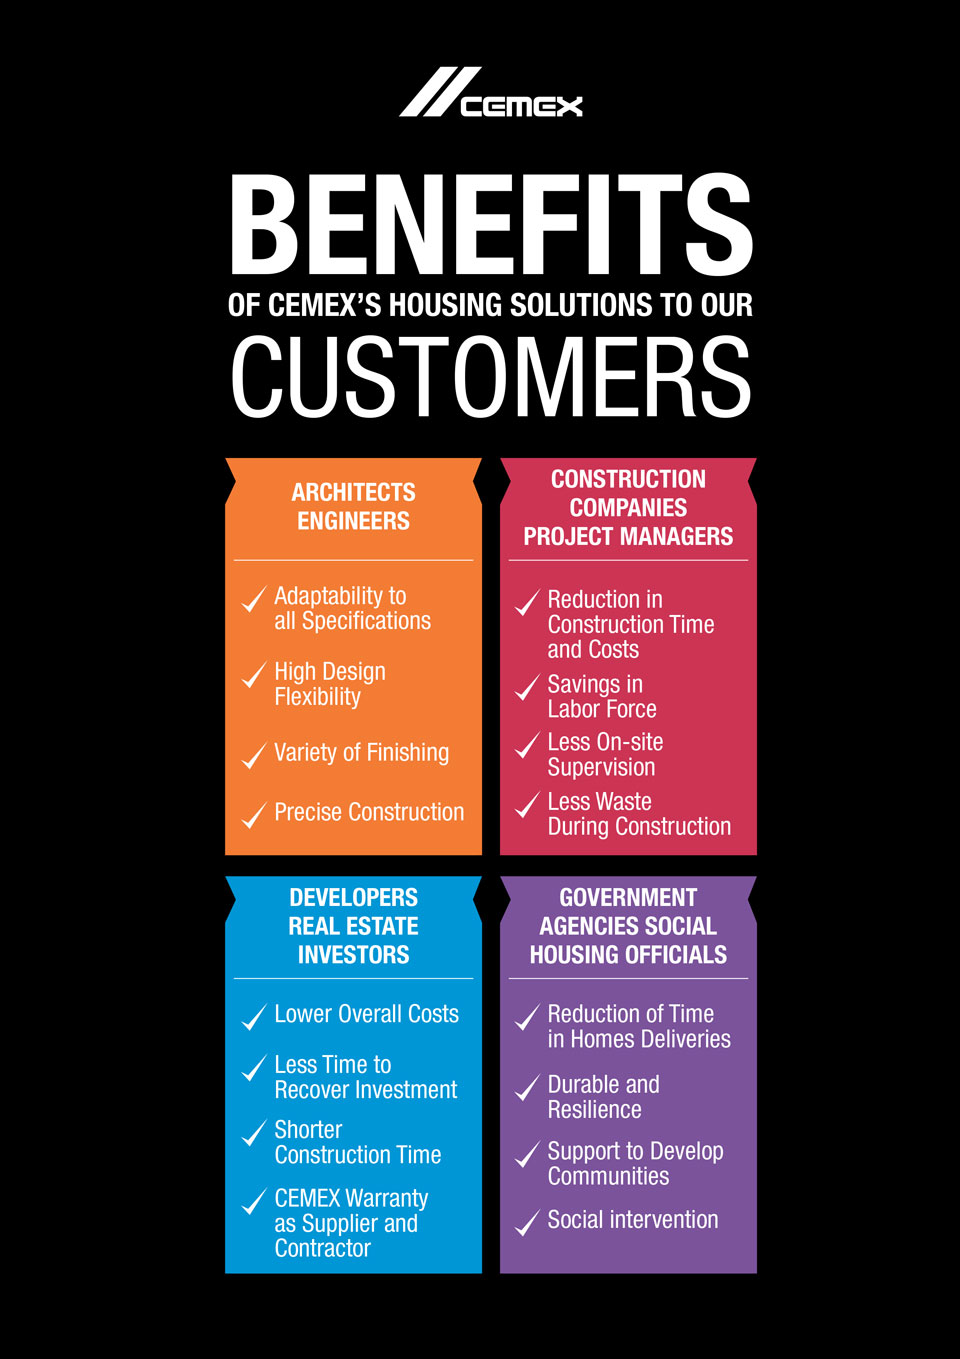 the image shows the several benefits that CEMEX offers to their customers